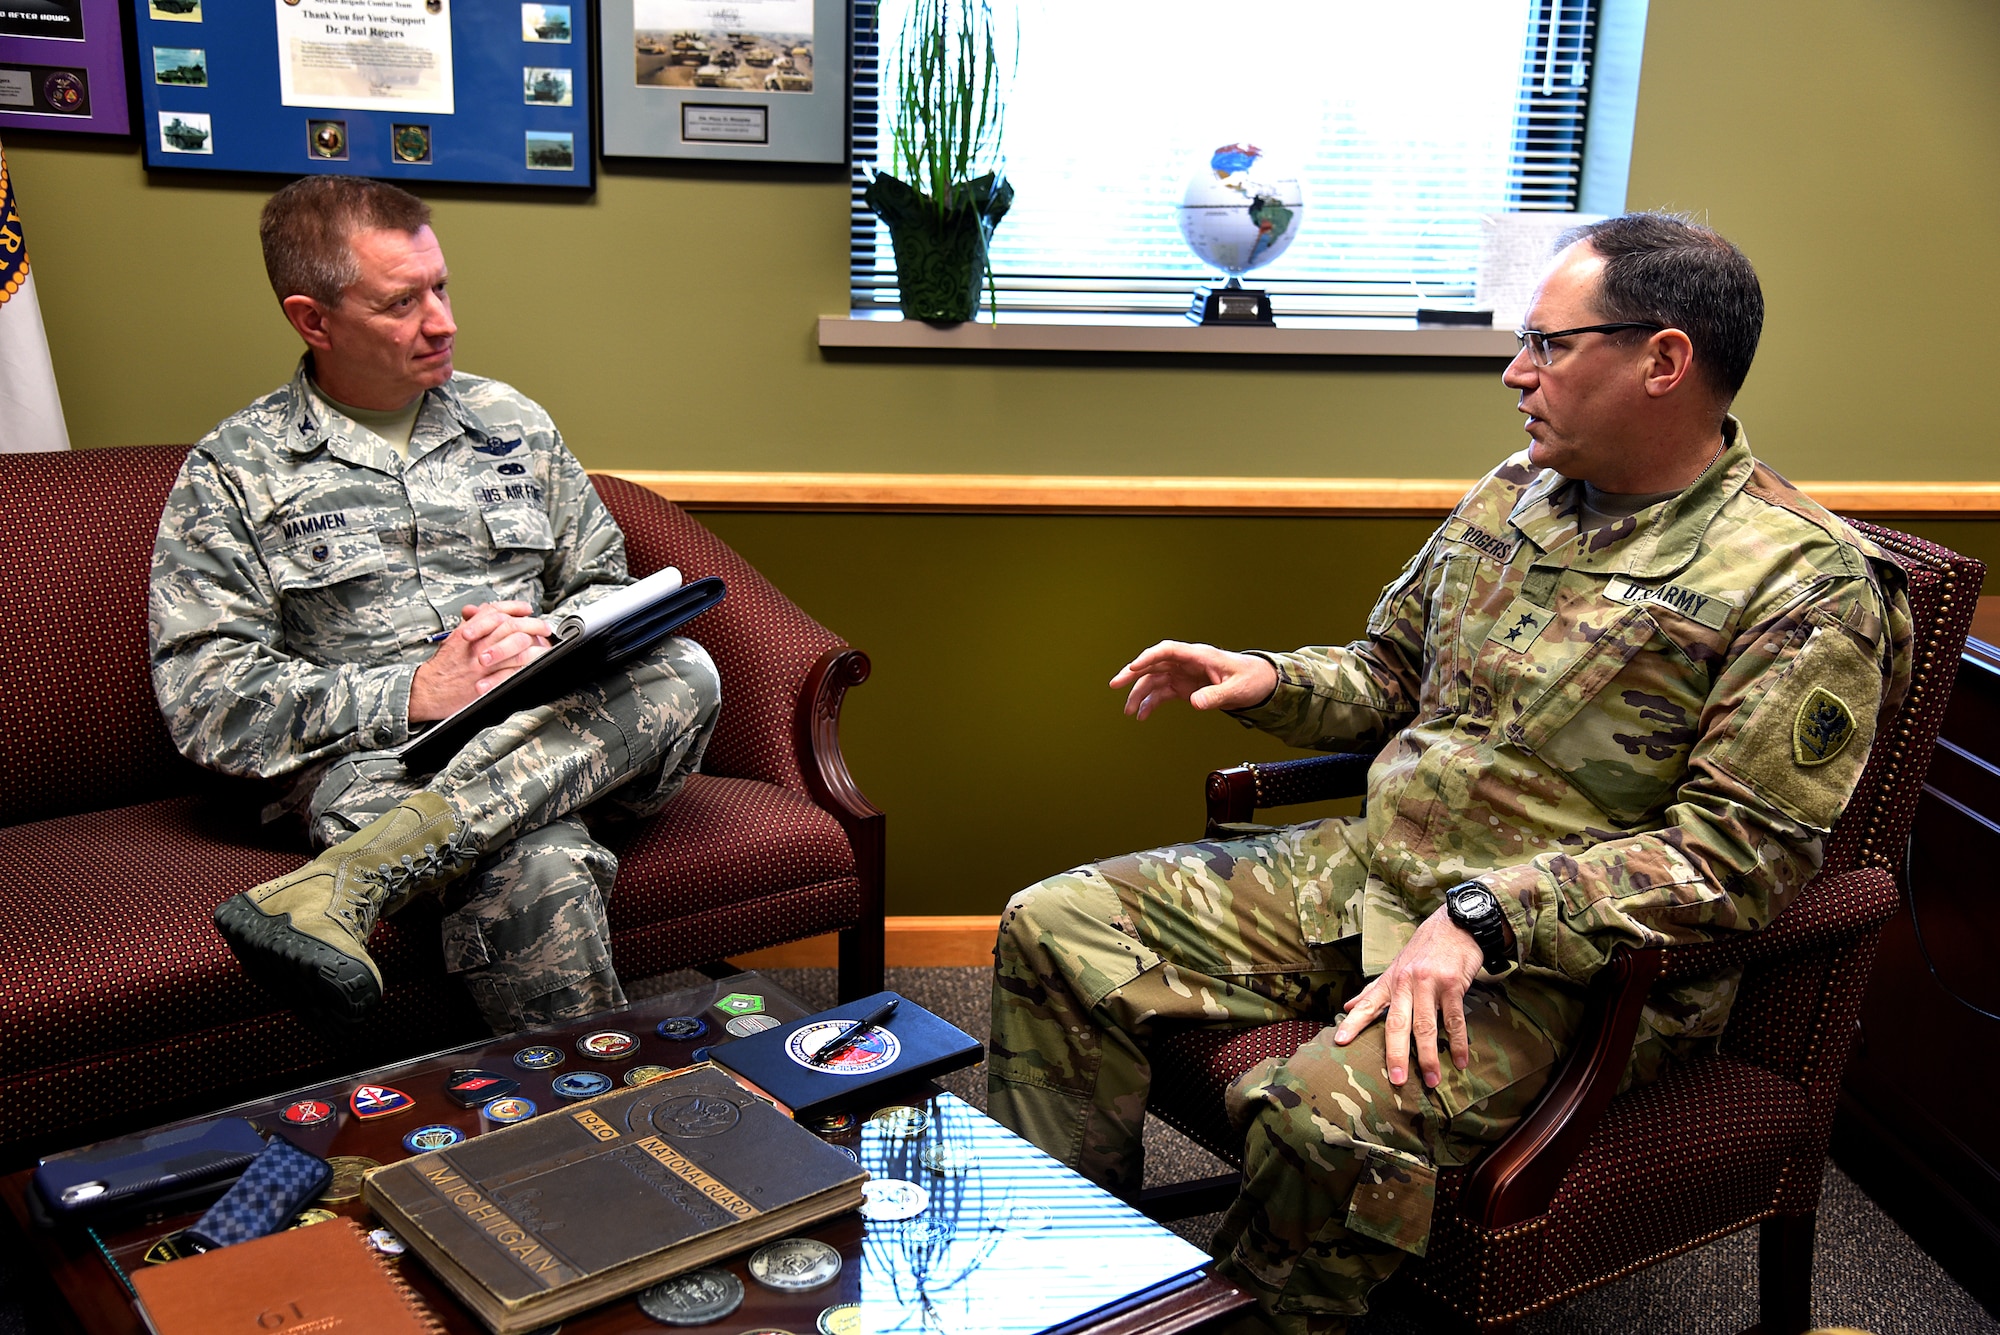 Michigan Air National Guard Col. Rolf E. Mammen discusses the future of the 127th Wing and Selfridge Air National Guard base with Maj. Gen. Paul Rogers, Adjutant General and Director of the Department of Military and Veterans Affairs on April 29, 2019, at Joint Force Headquarters in Lansing, Michigan.